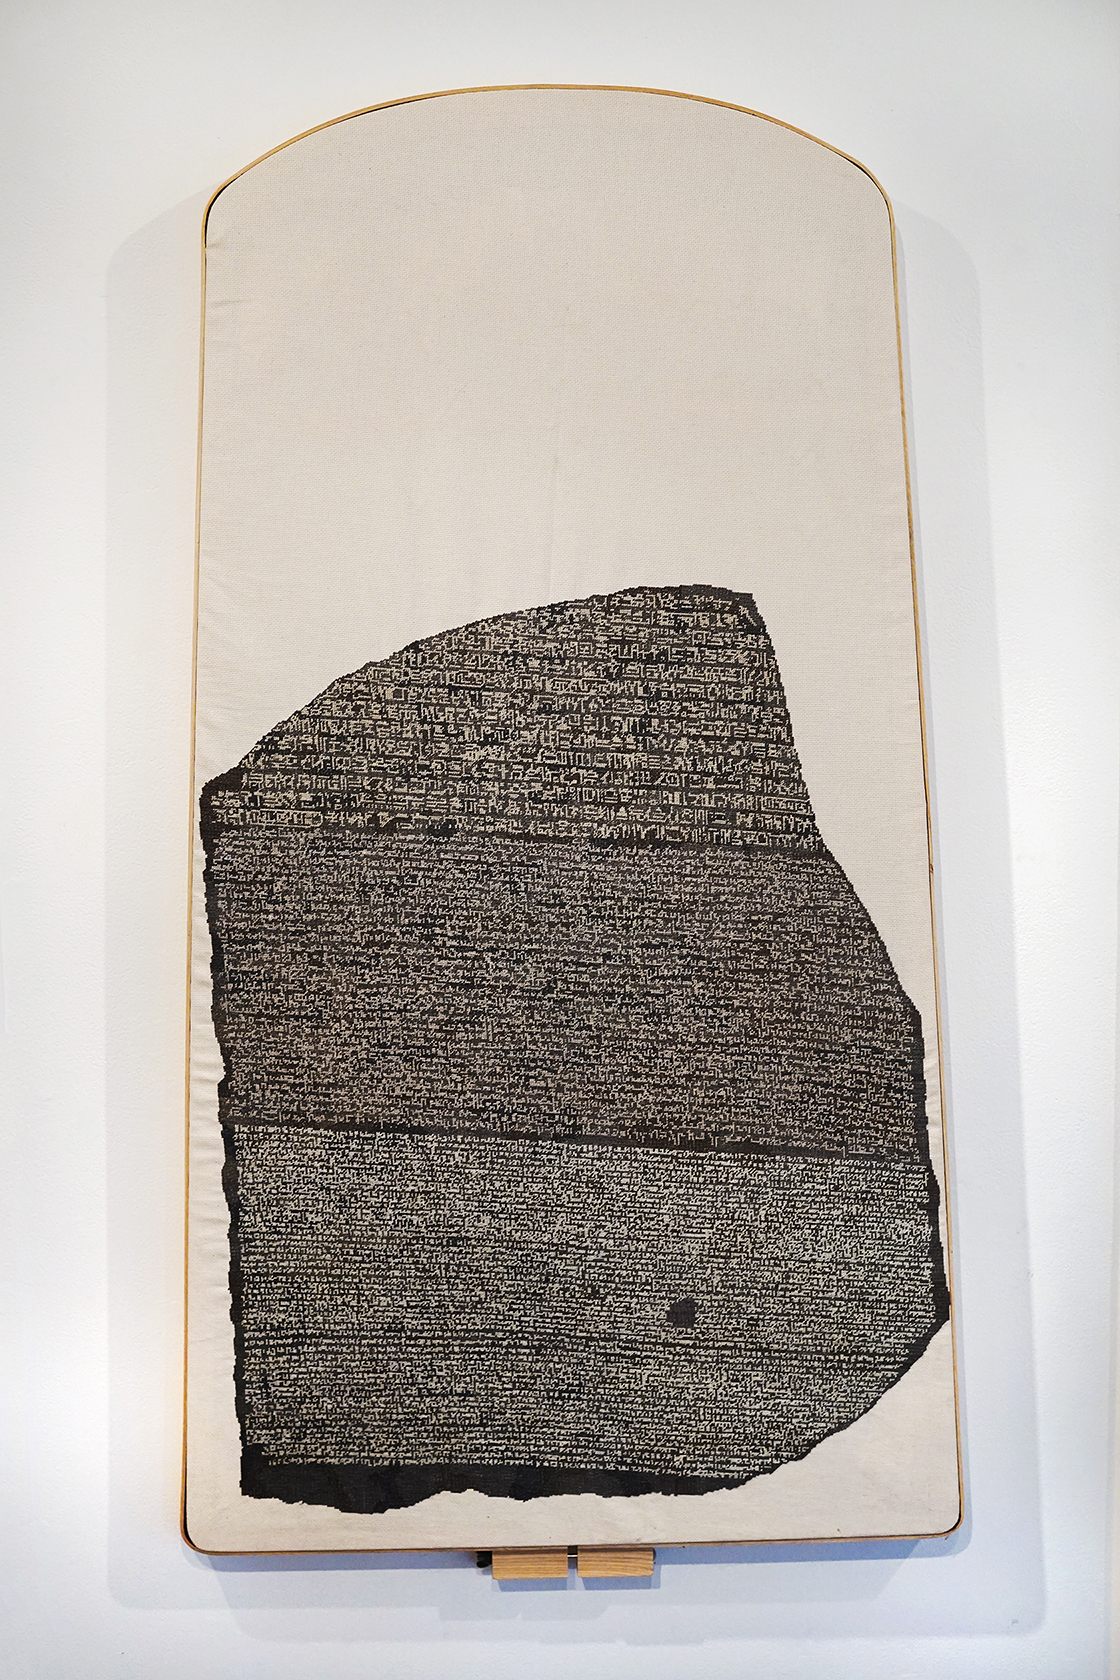 A large embroidery frame resembling a tall boulder with cream-colored cloth and black and white embroidery resembling densely written text